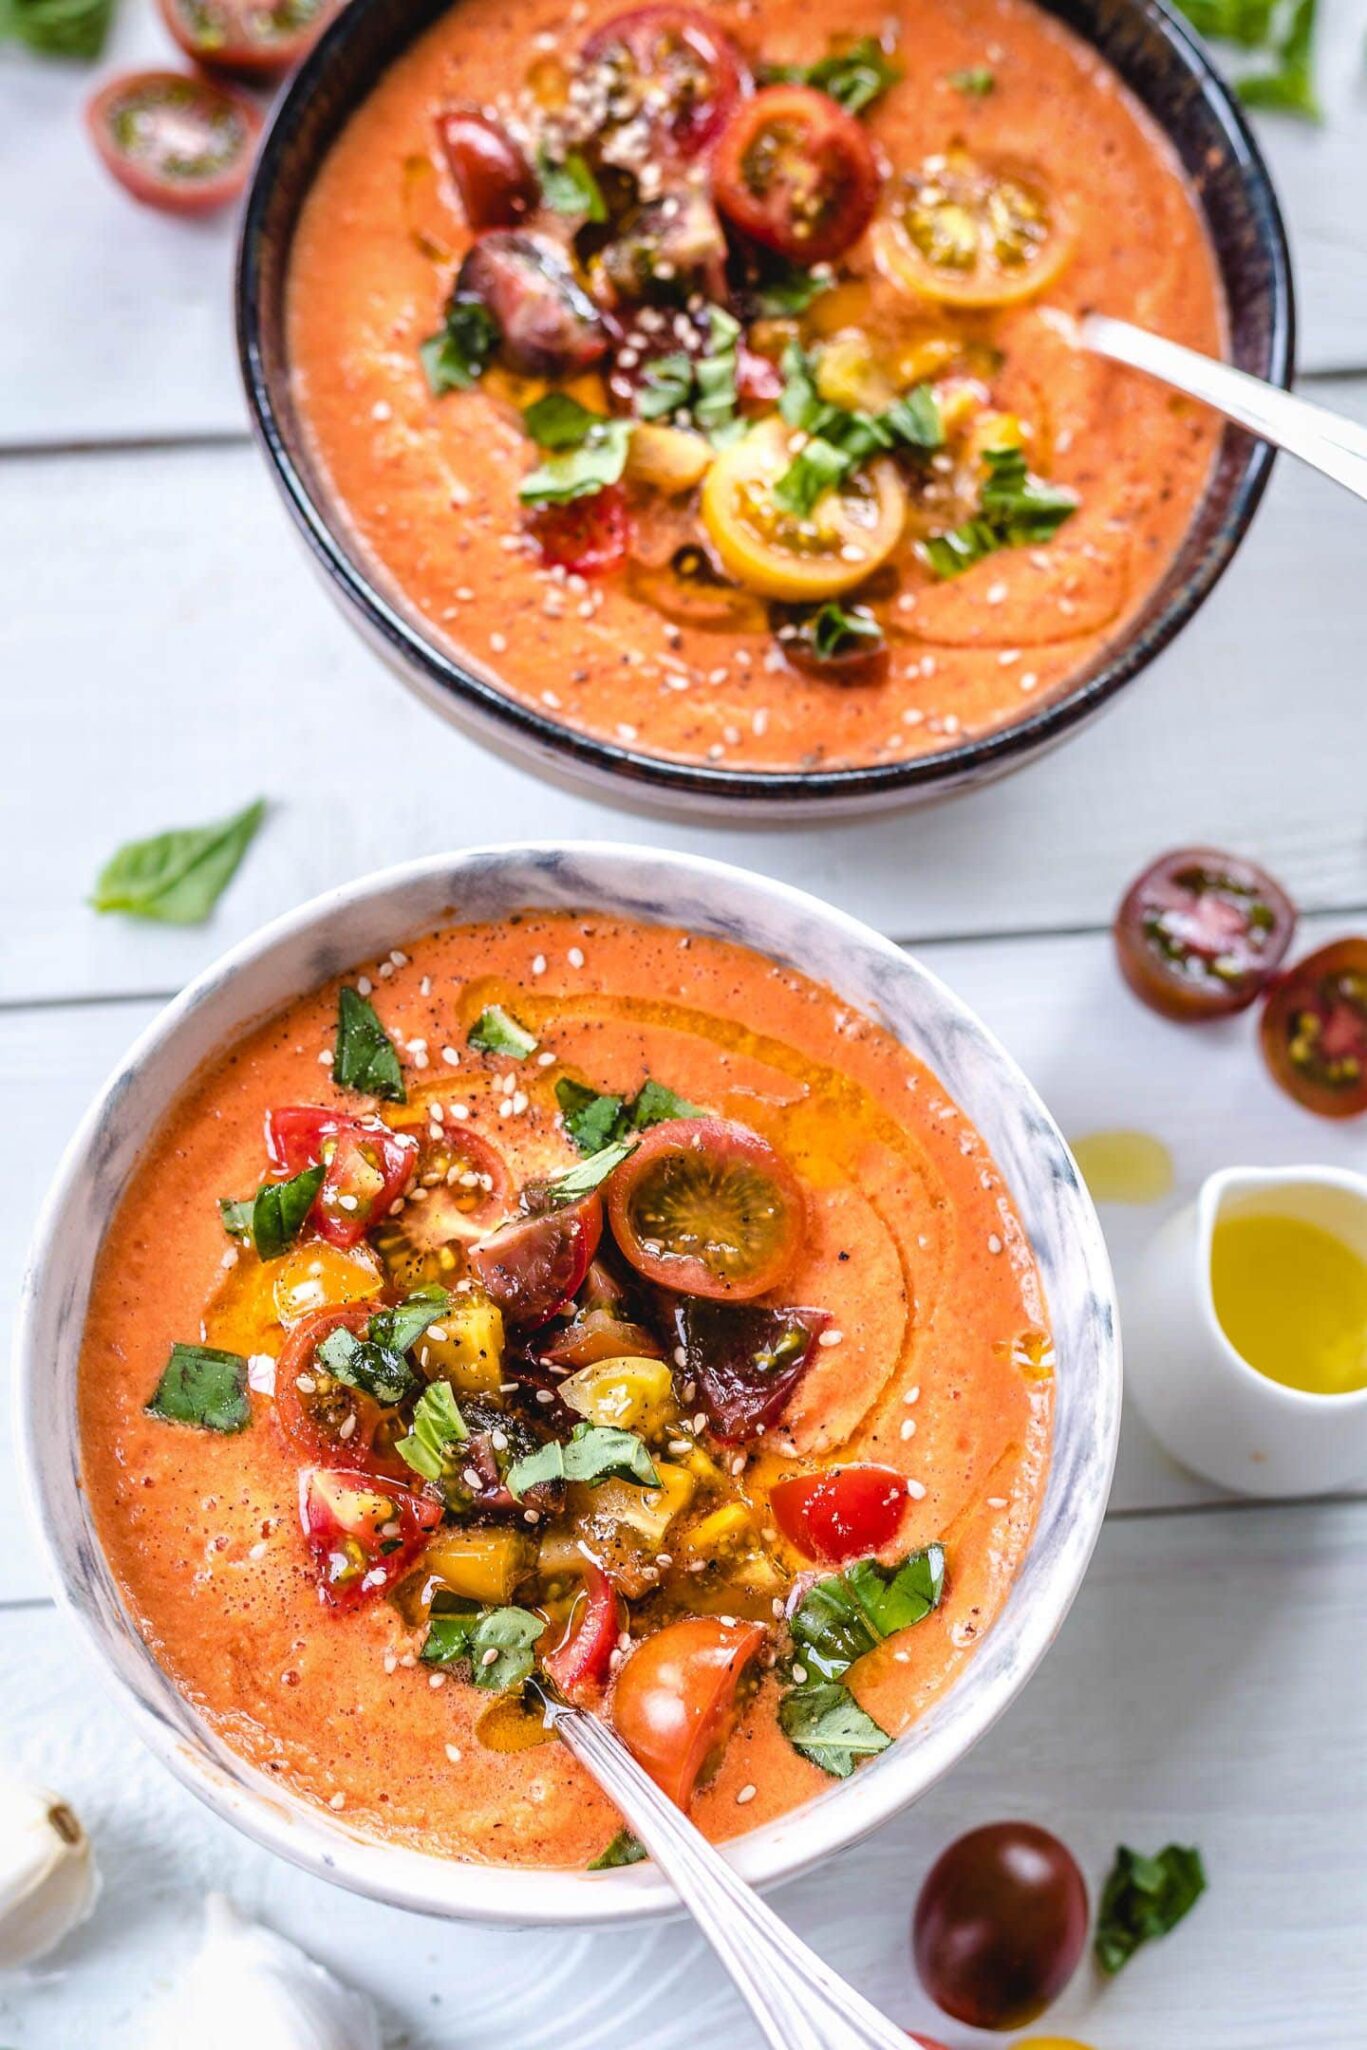 Two bowls filled with orange colored cold soup topped with sliced tomatoes and herbs.